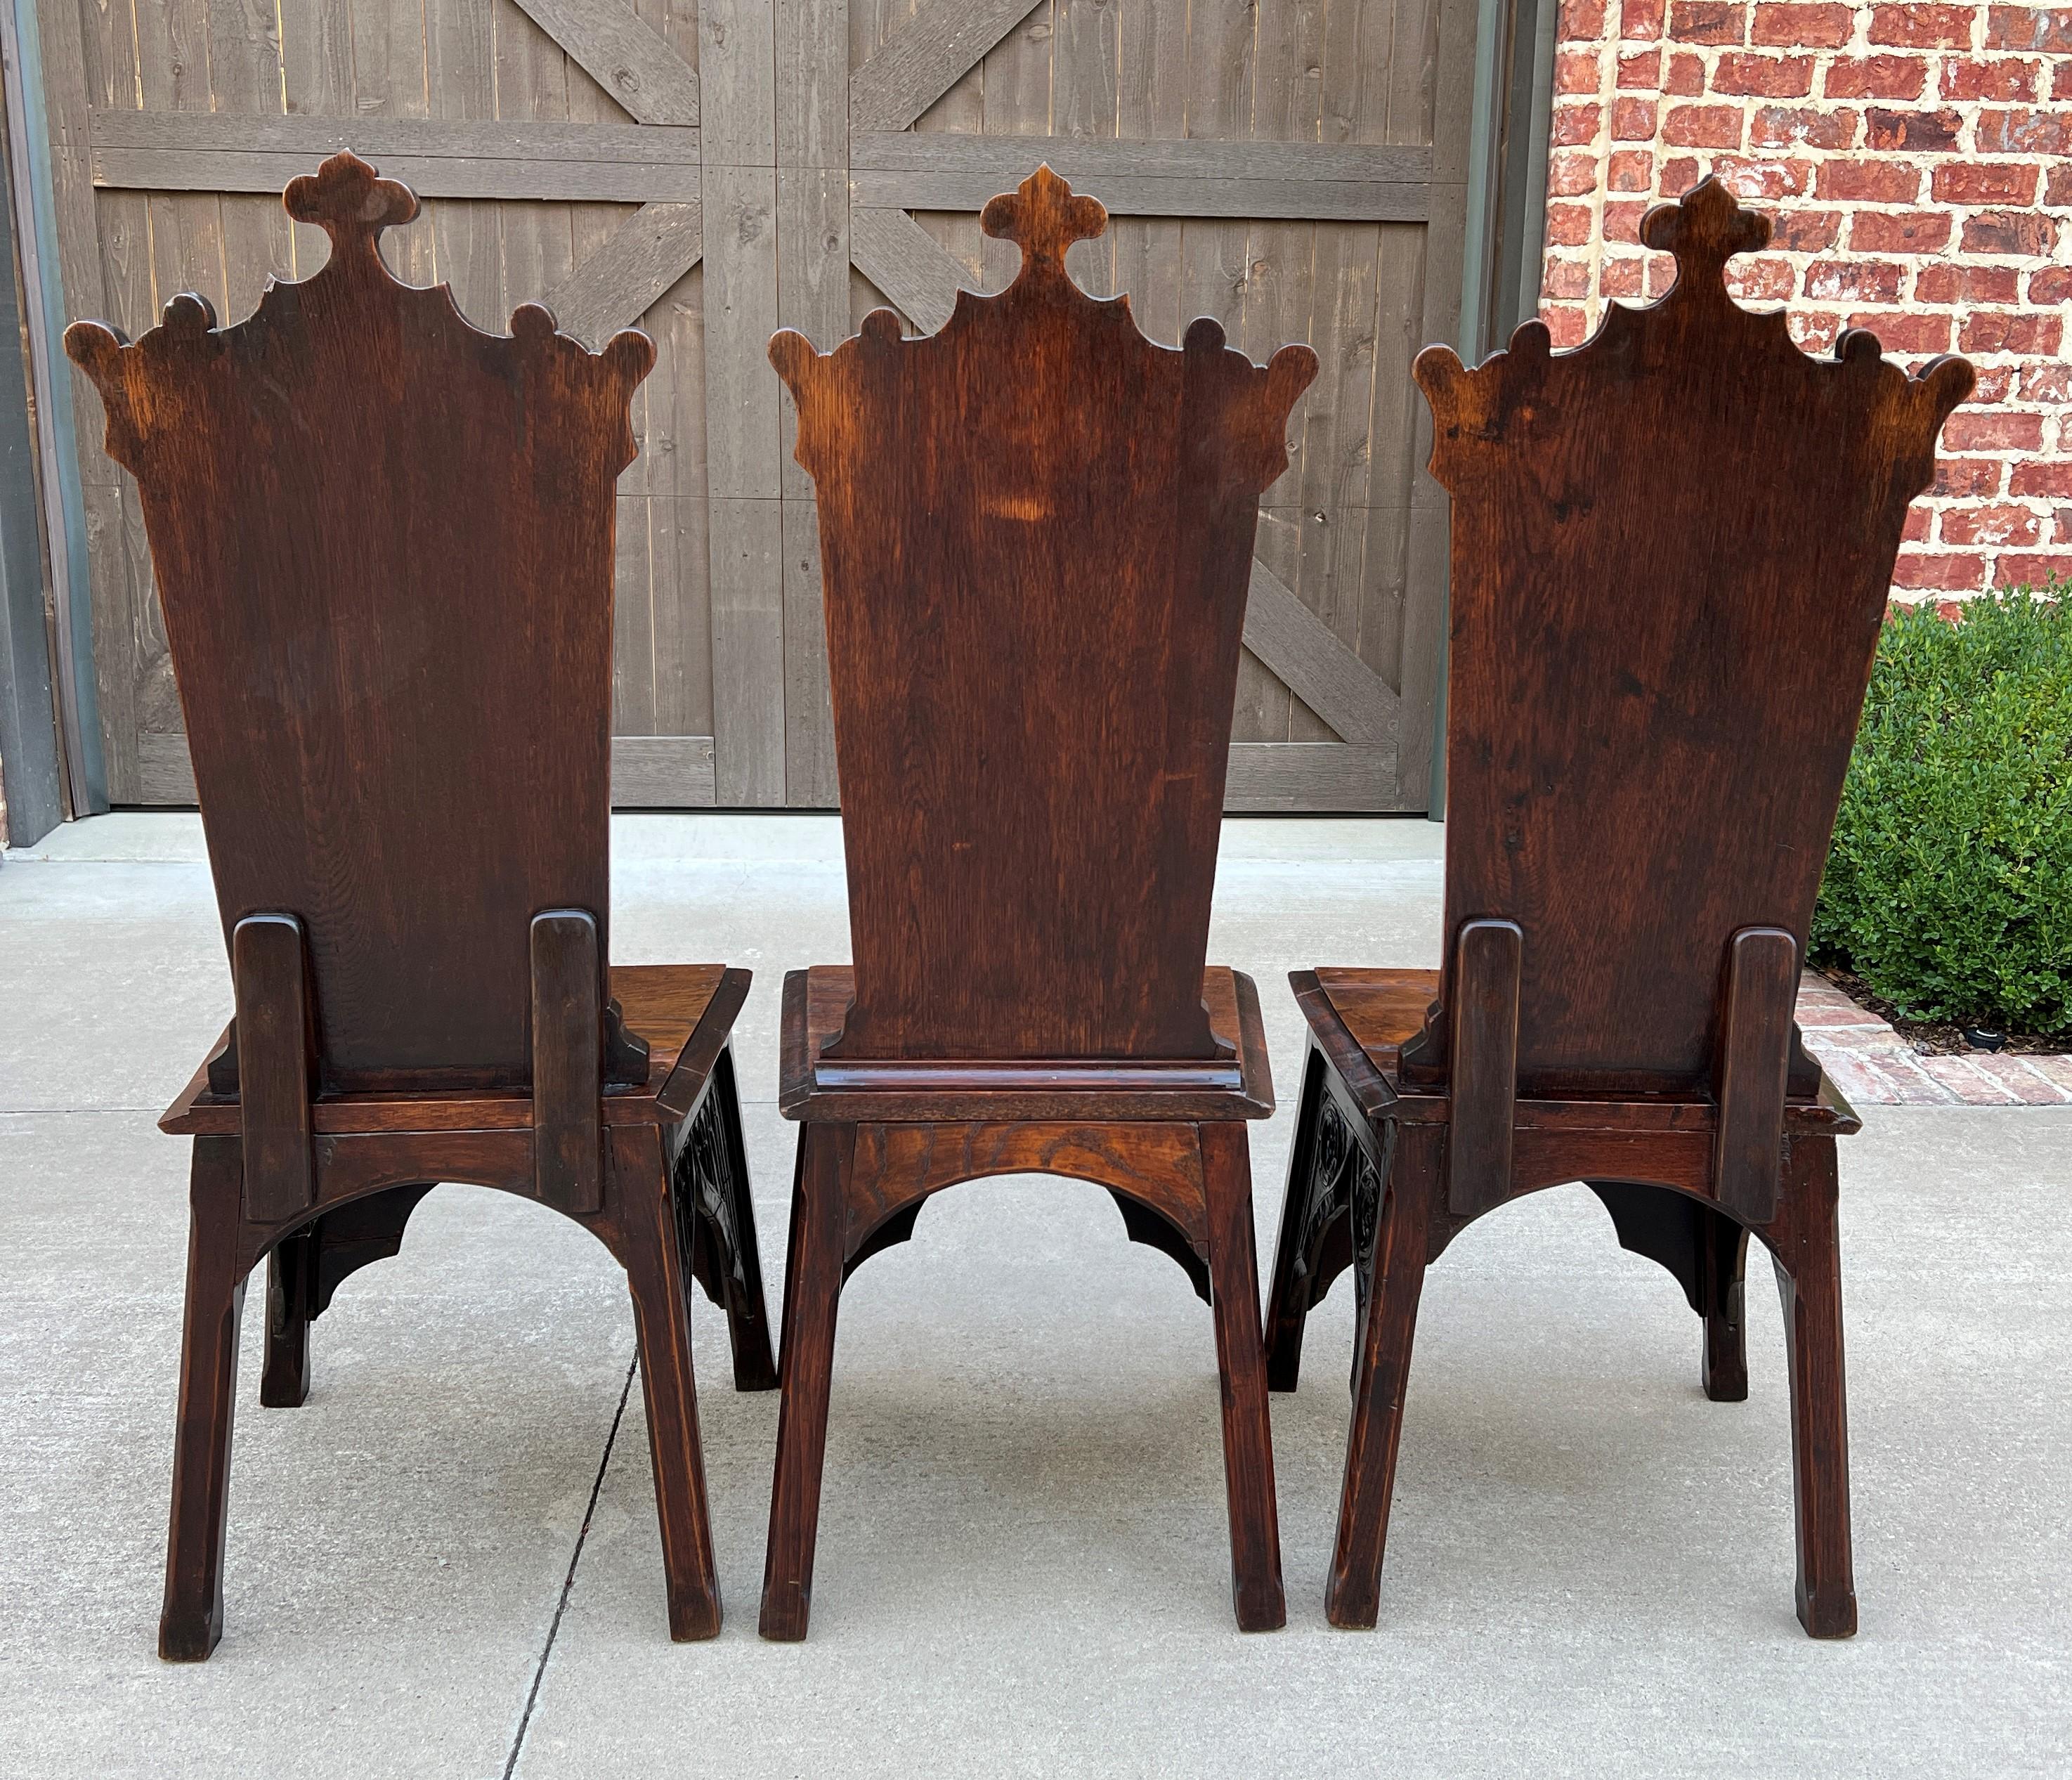 Antique French Chairs Set of 6 Gothic Revival Oak Pegged Dining Side Chairs 19C 9